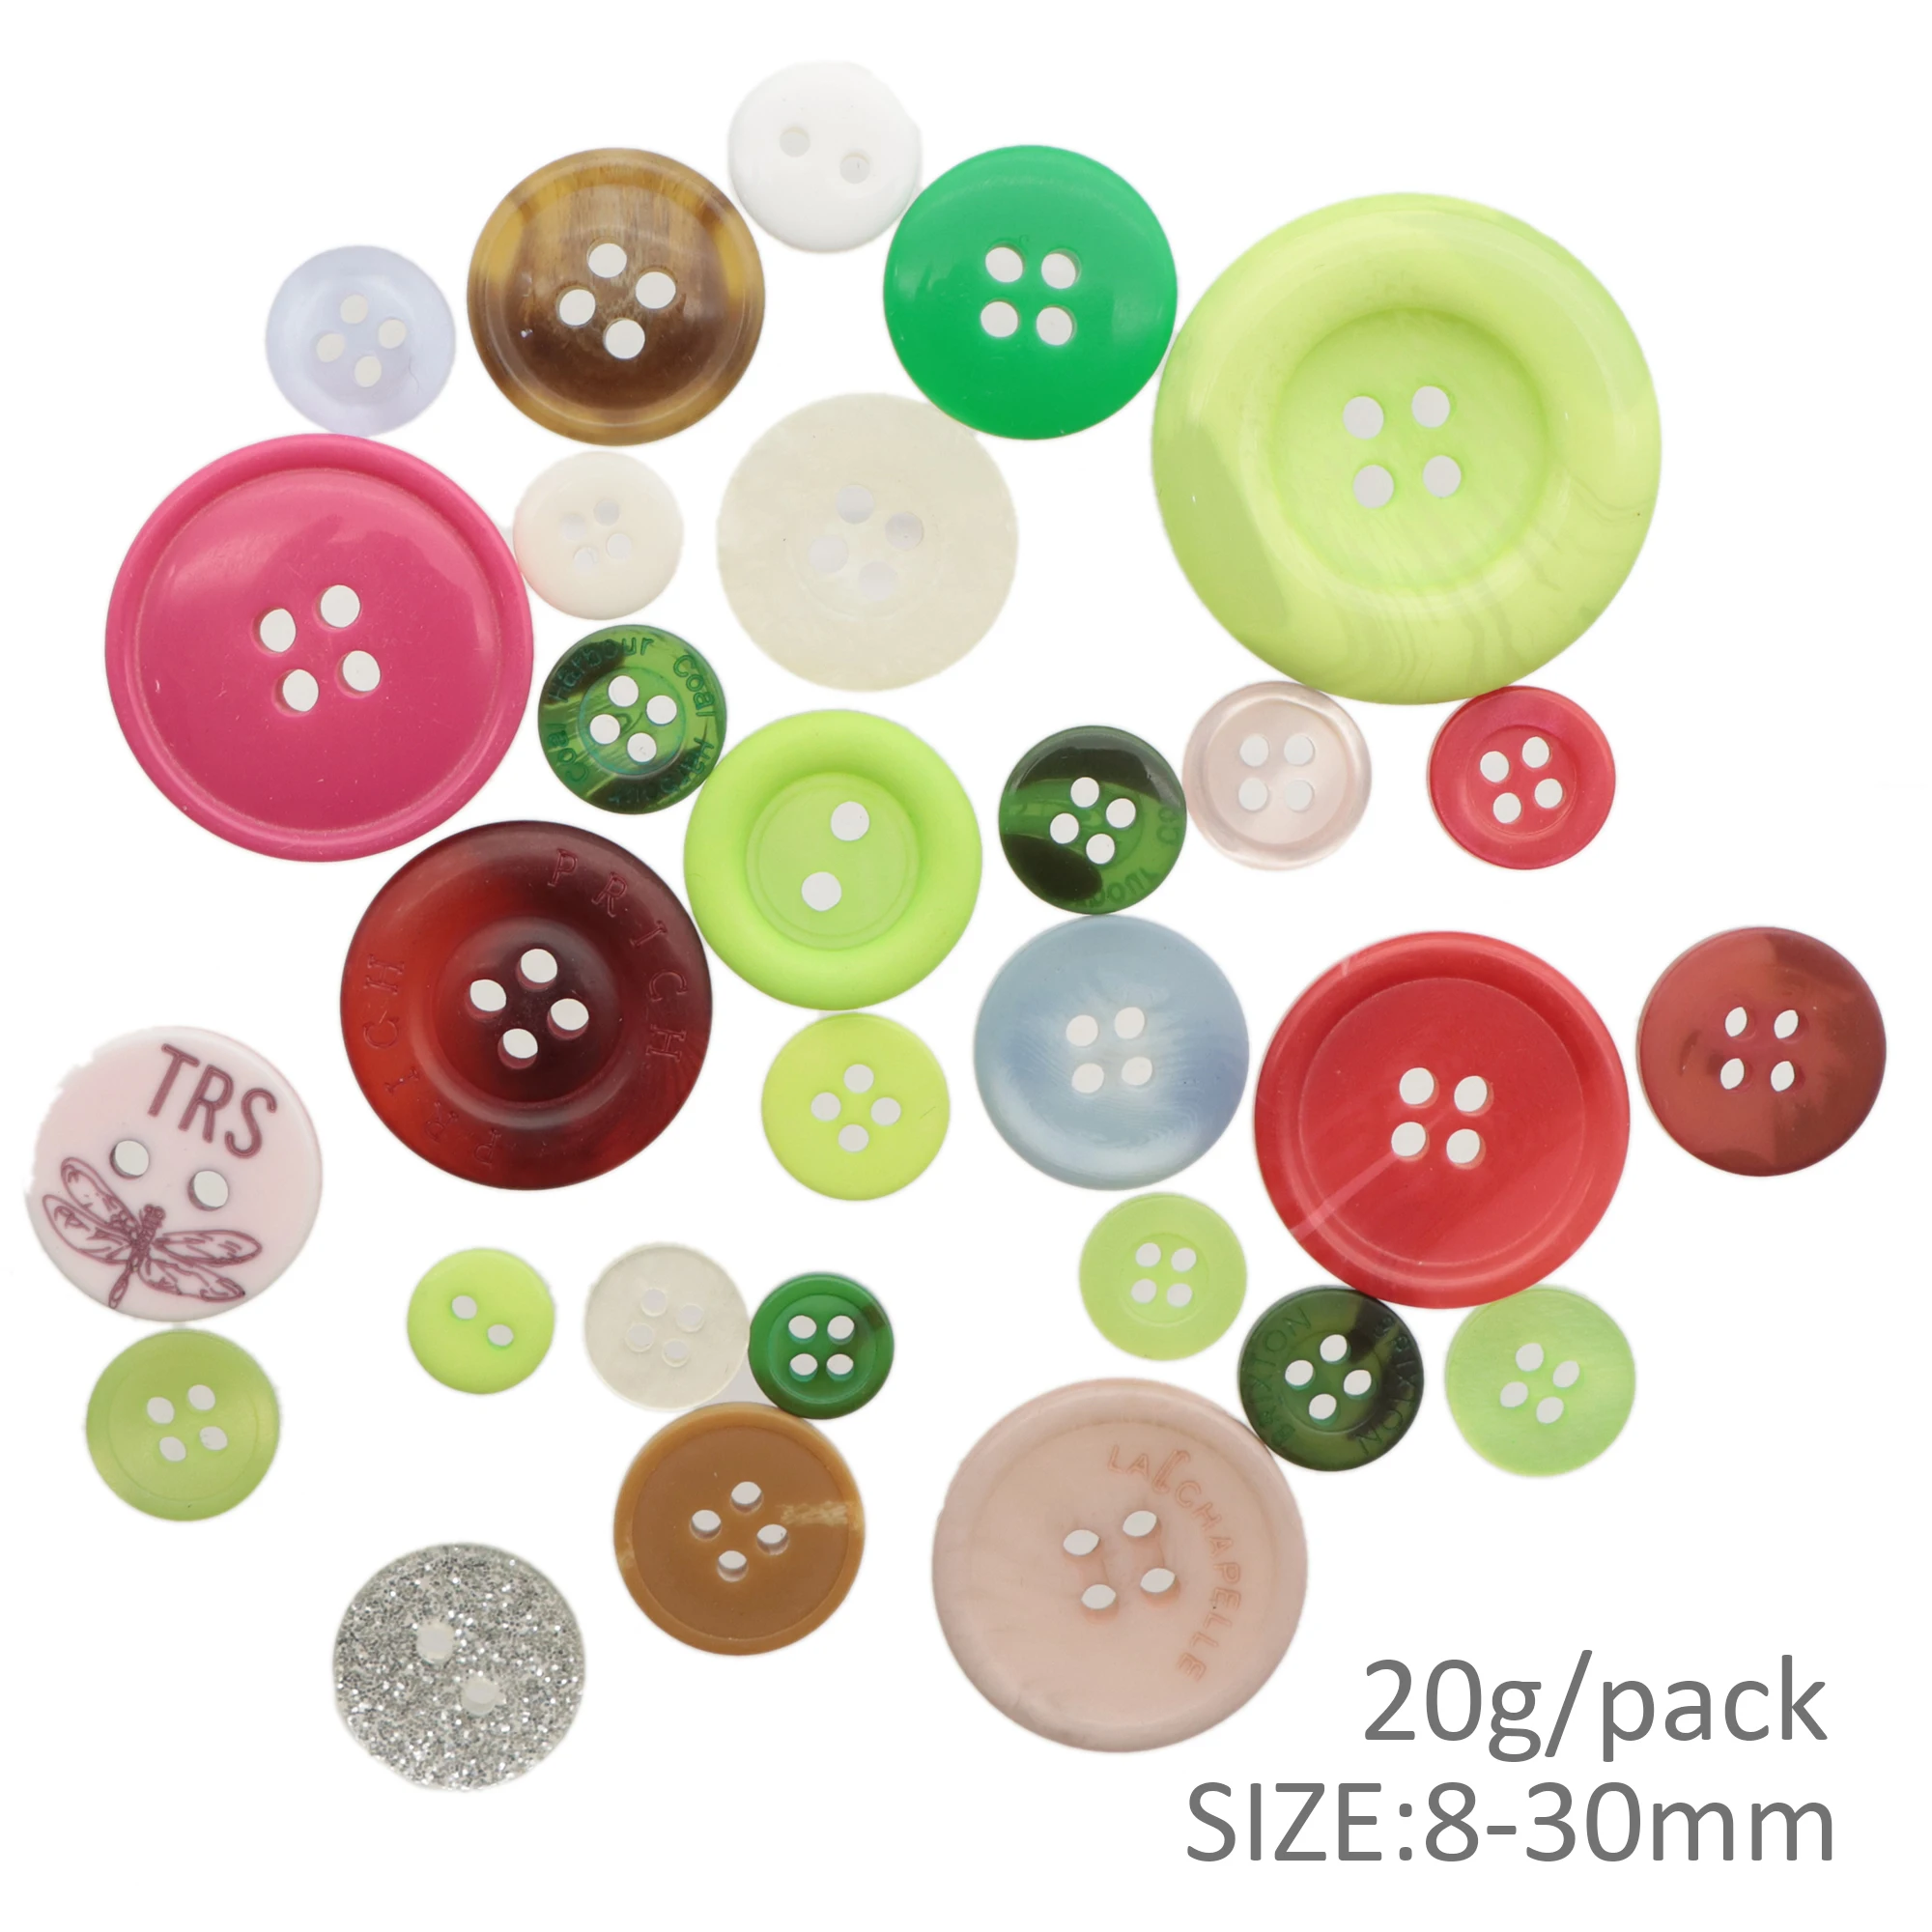 100 x Quality Pretty Resin Random Mix Buttons Craft Scrapbook Sewing Cardmaking 